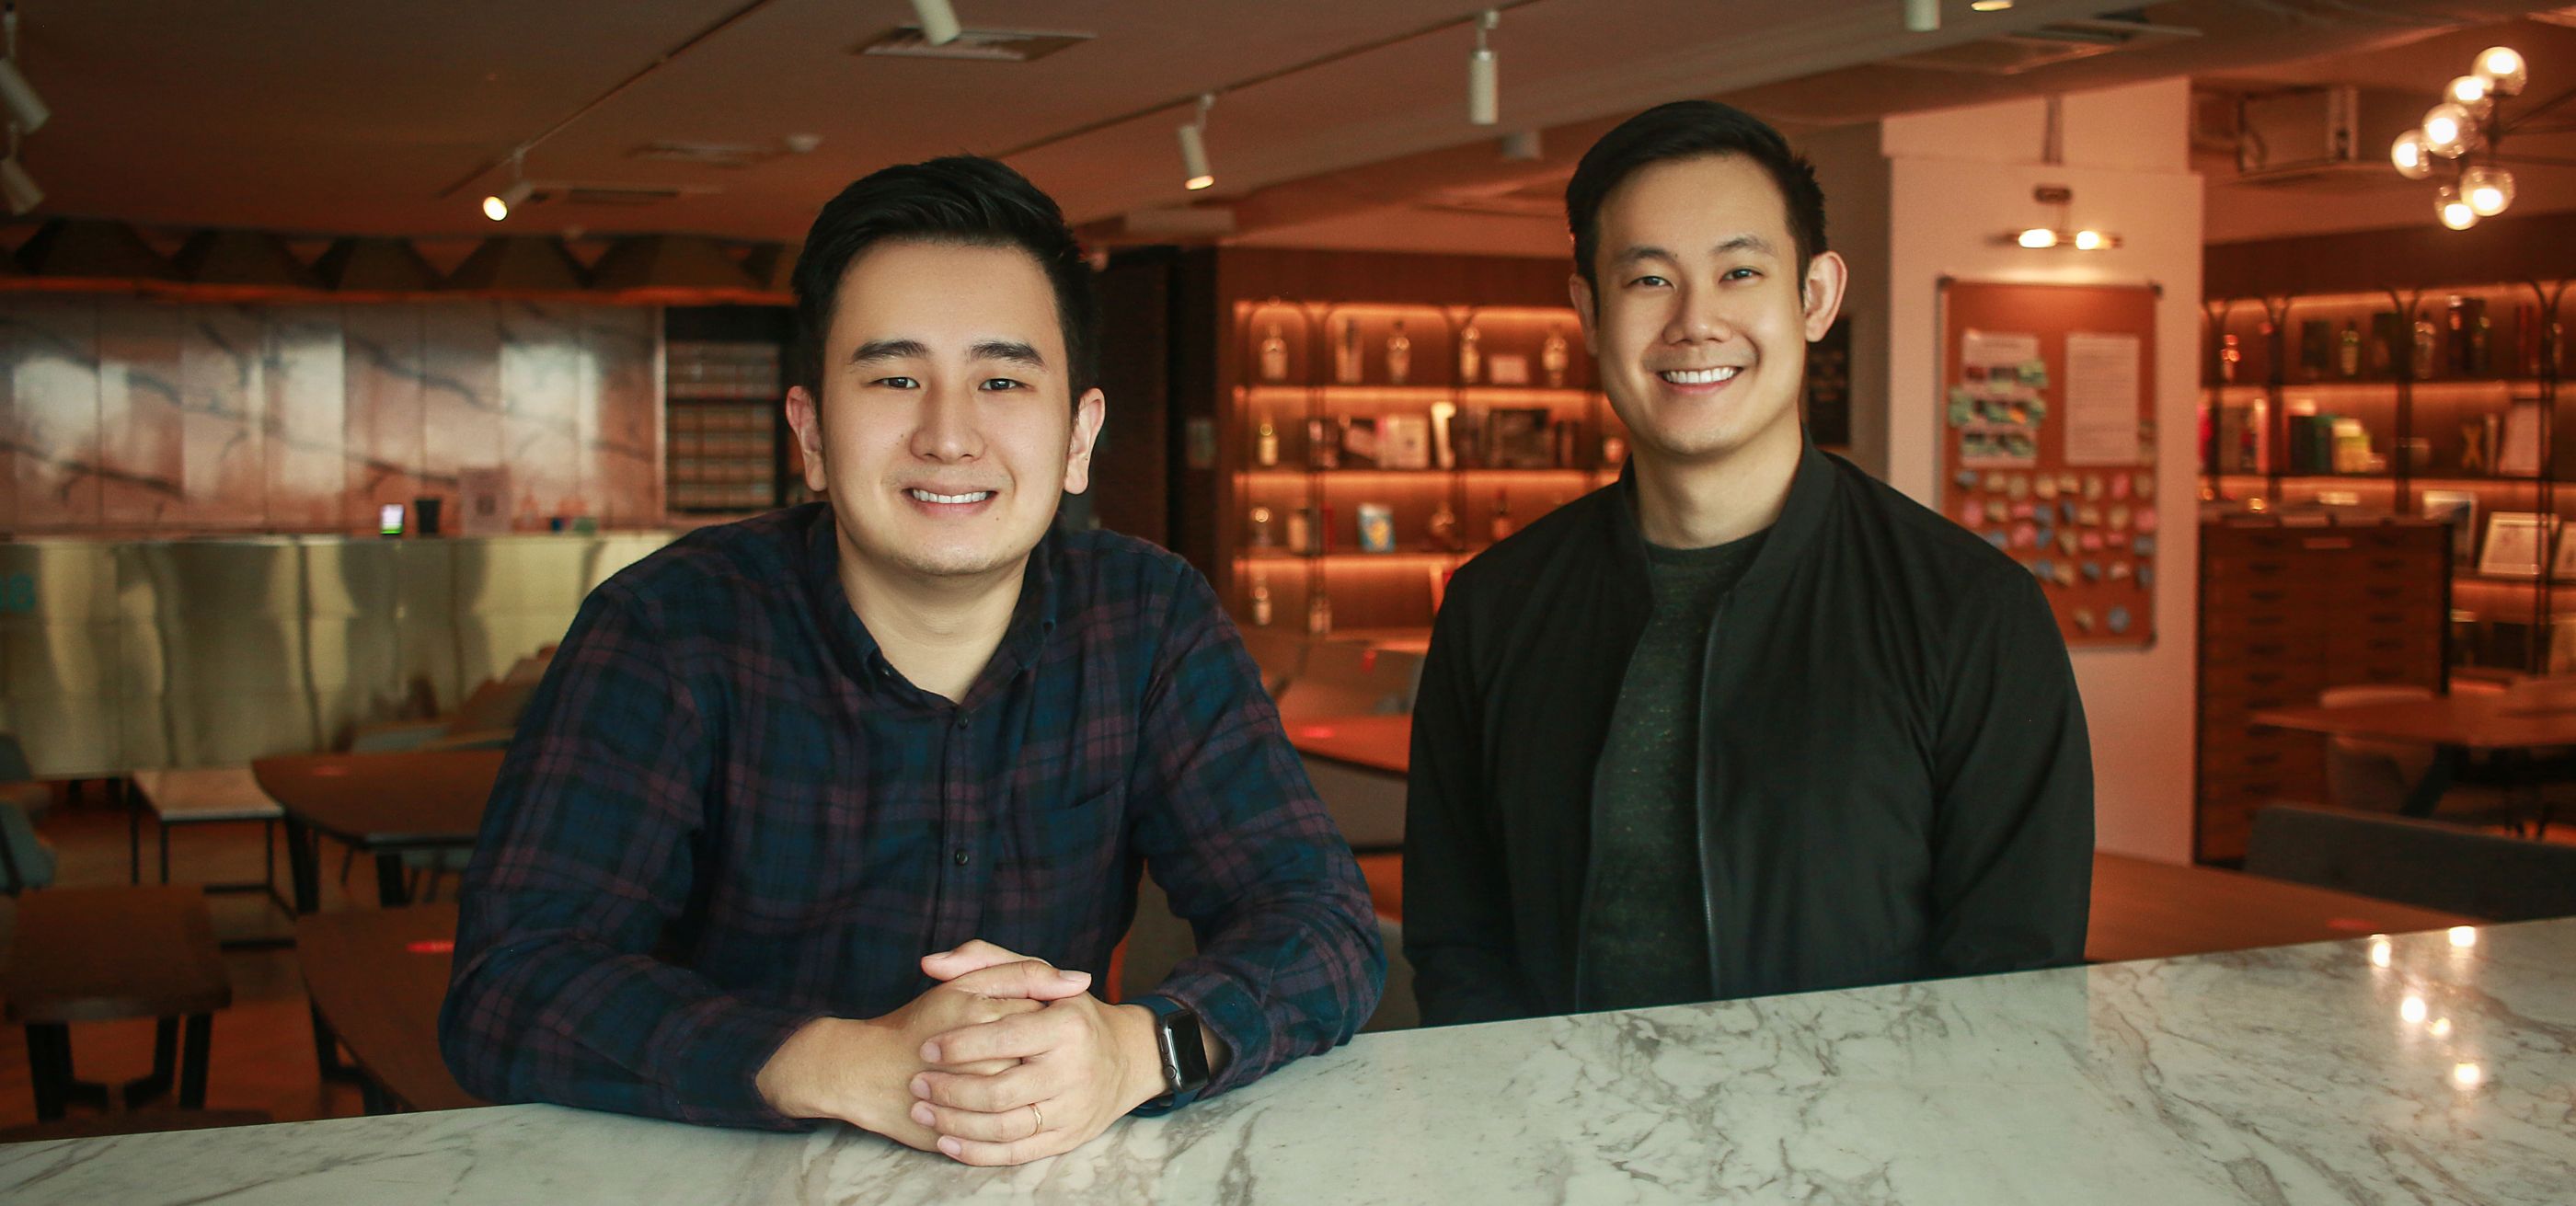 Datature co-founder Keechin Goh poses with another man.